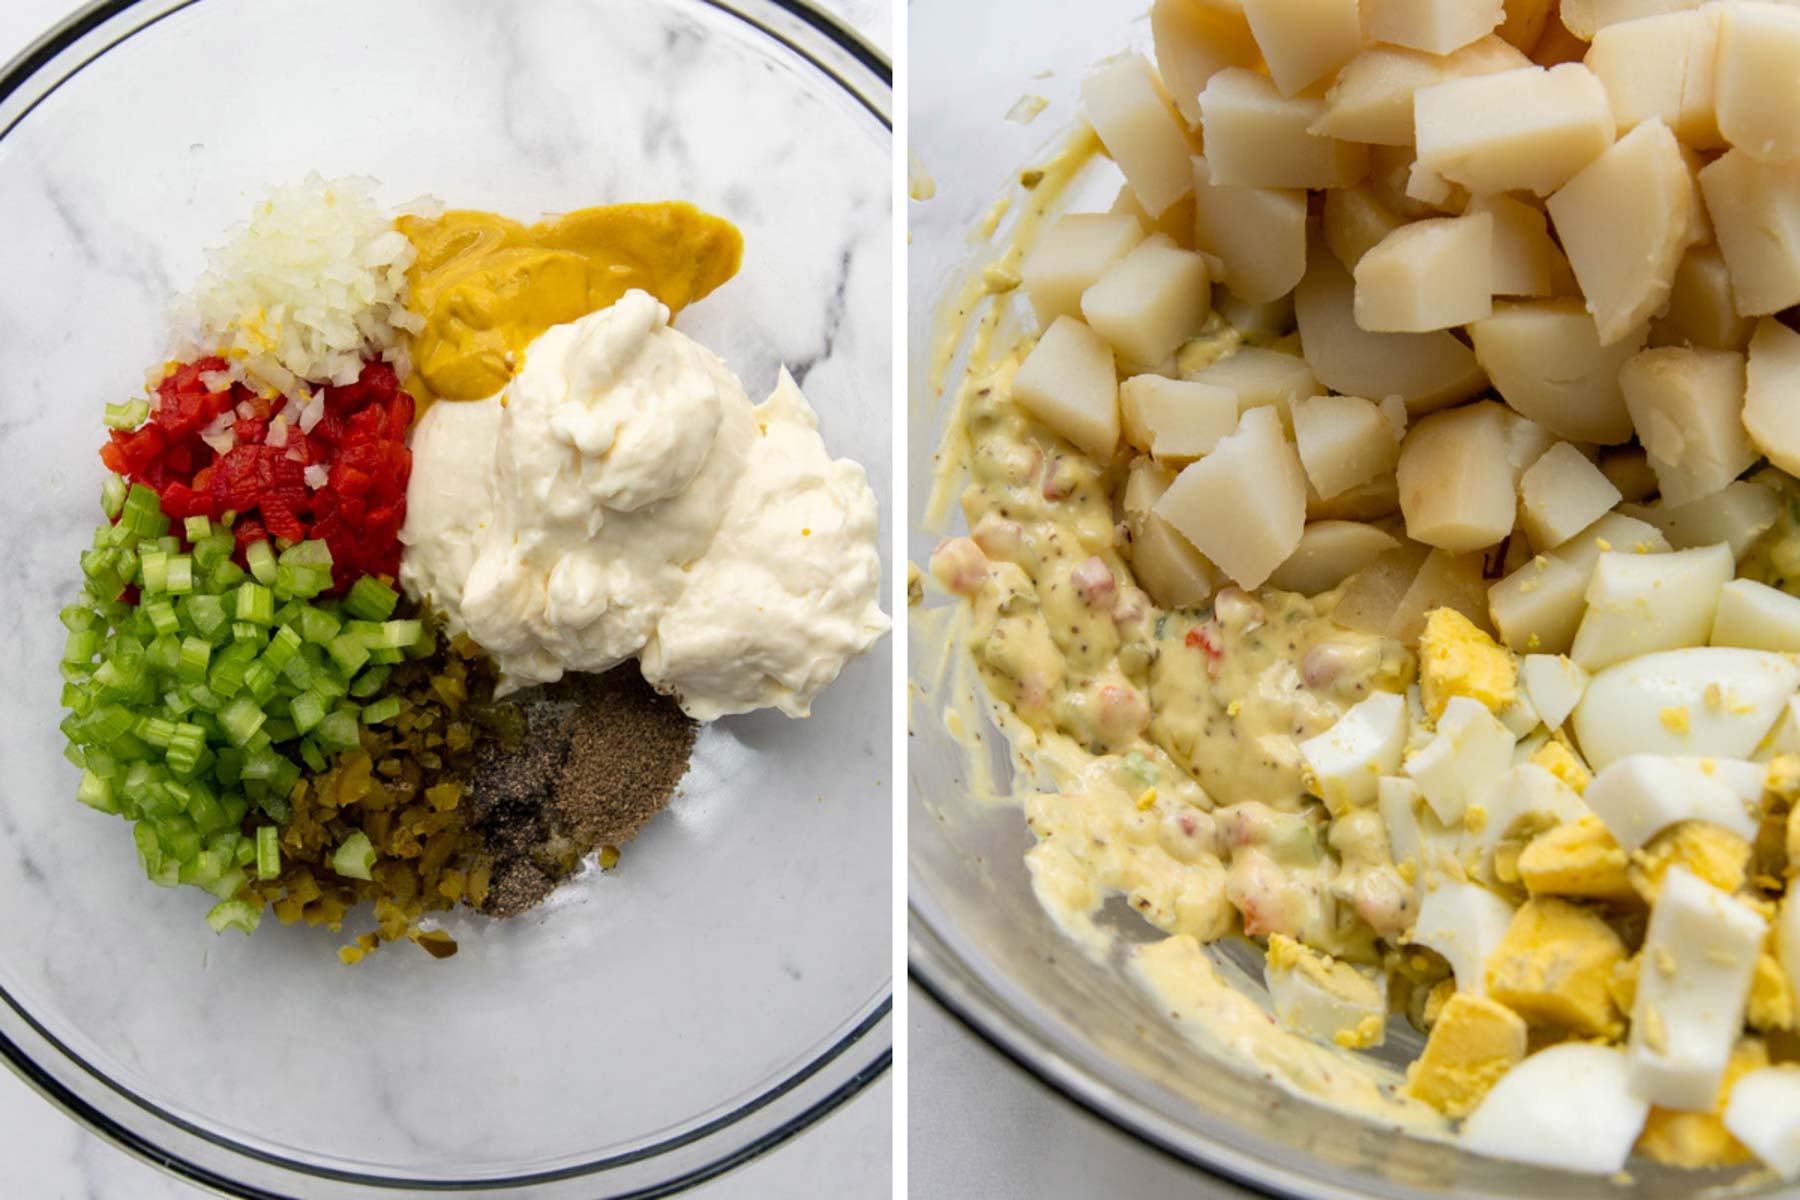 images showing how to mix together amish potato salad.